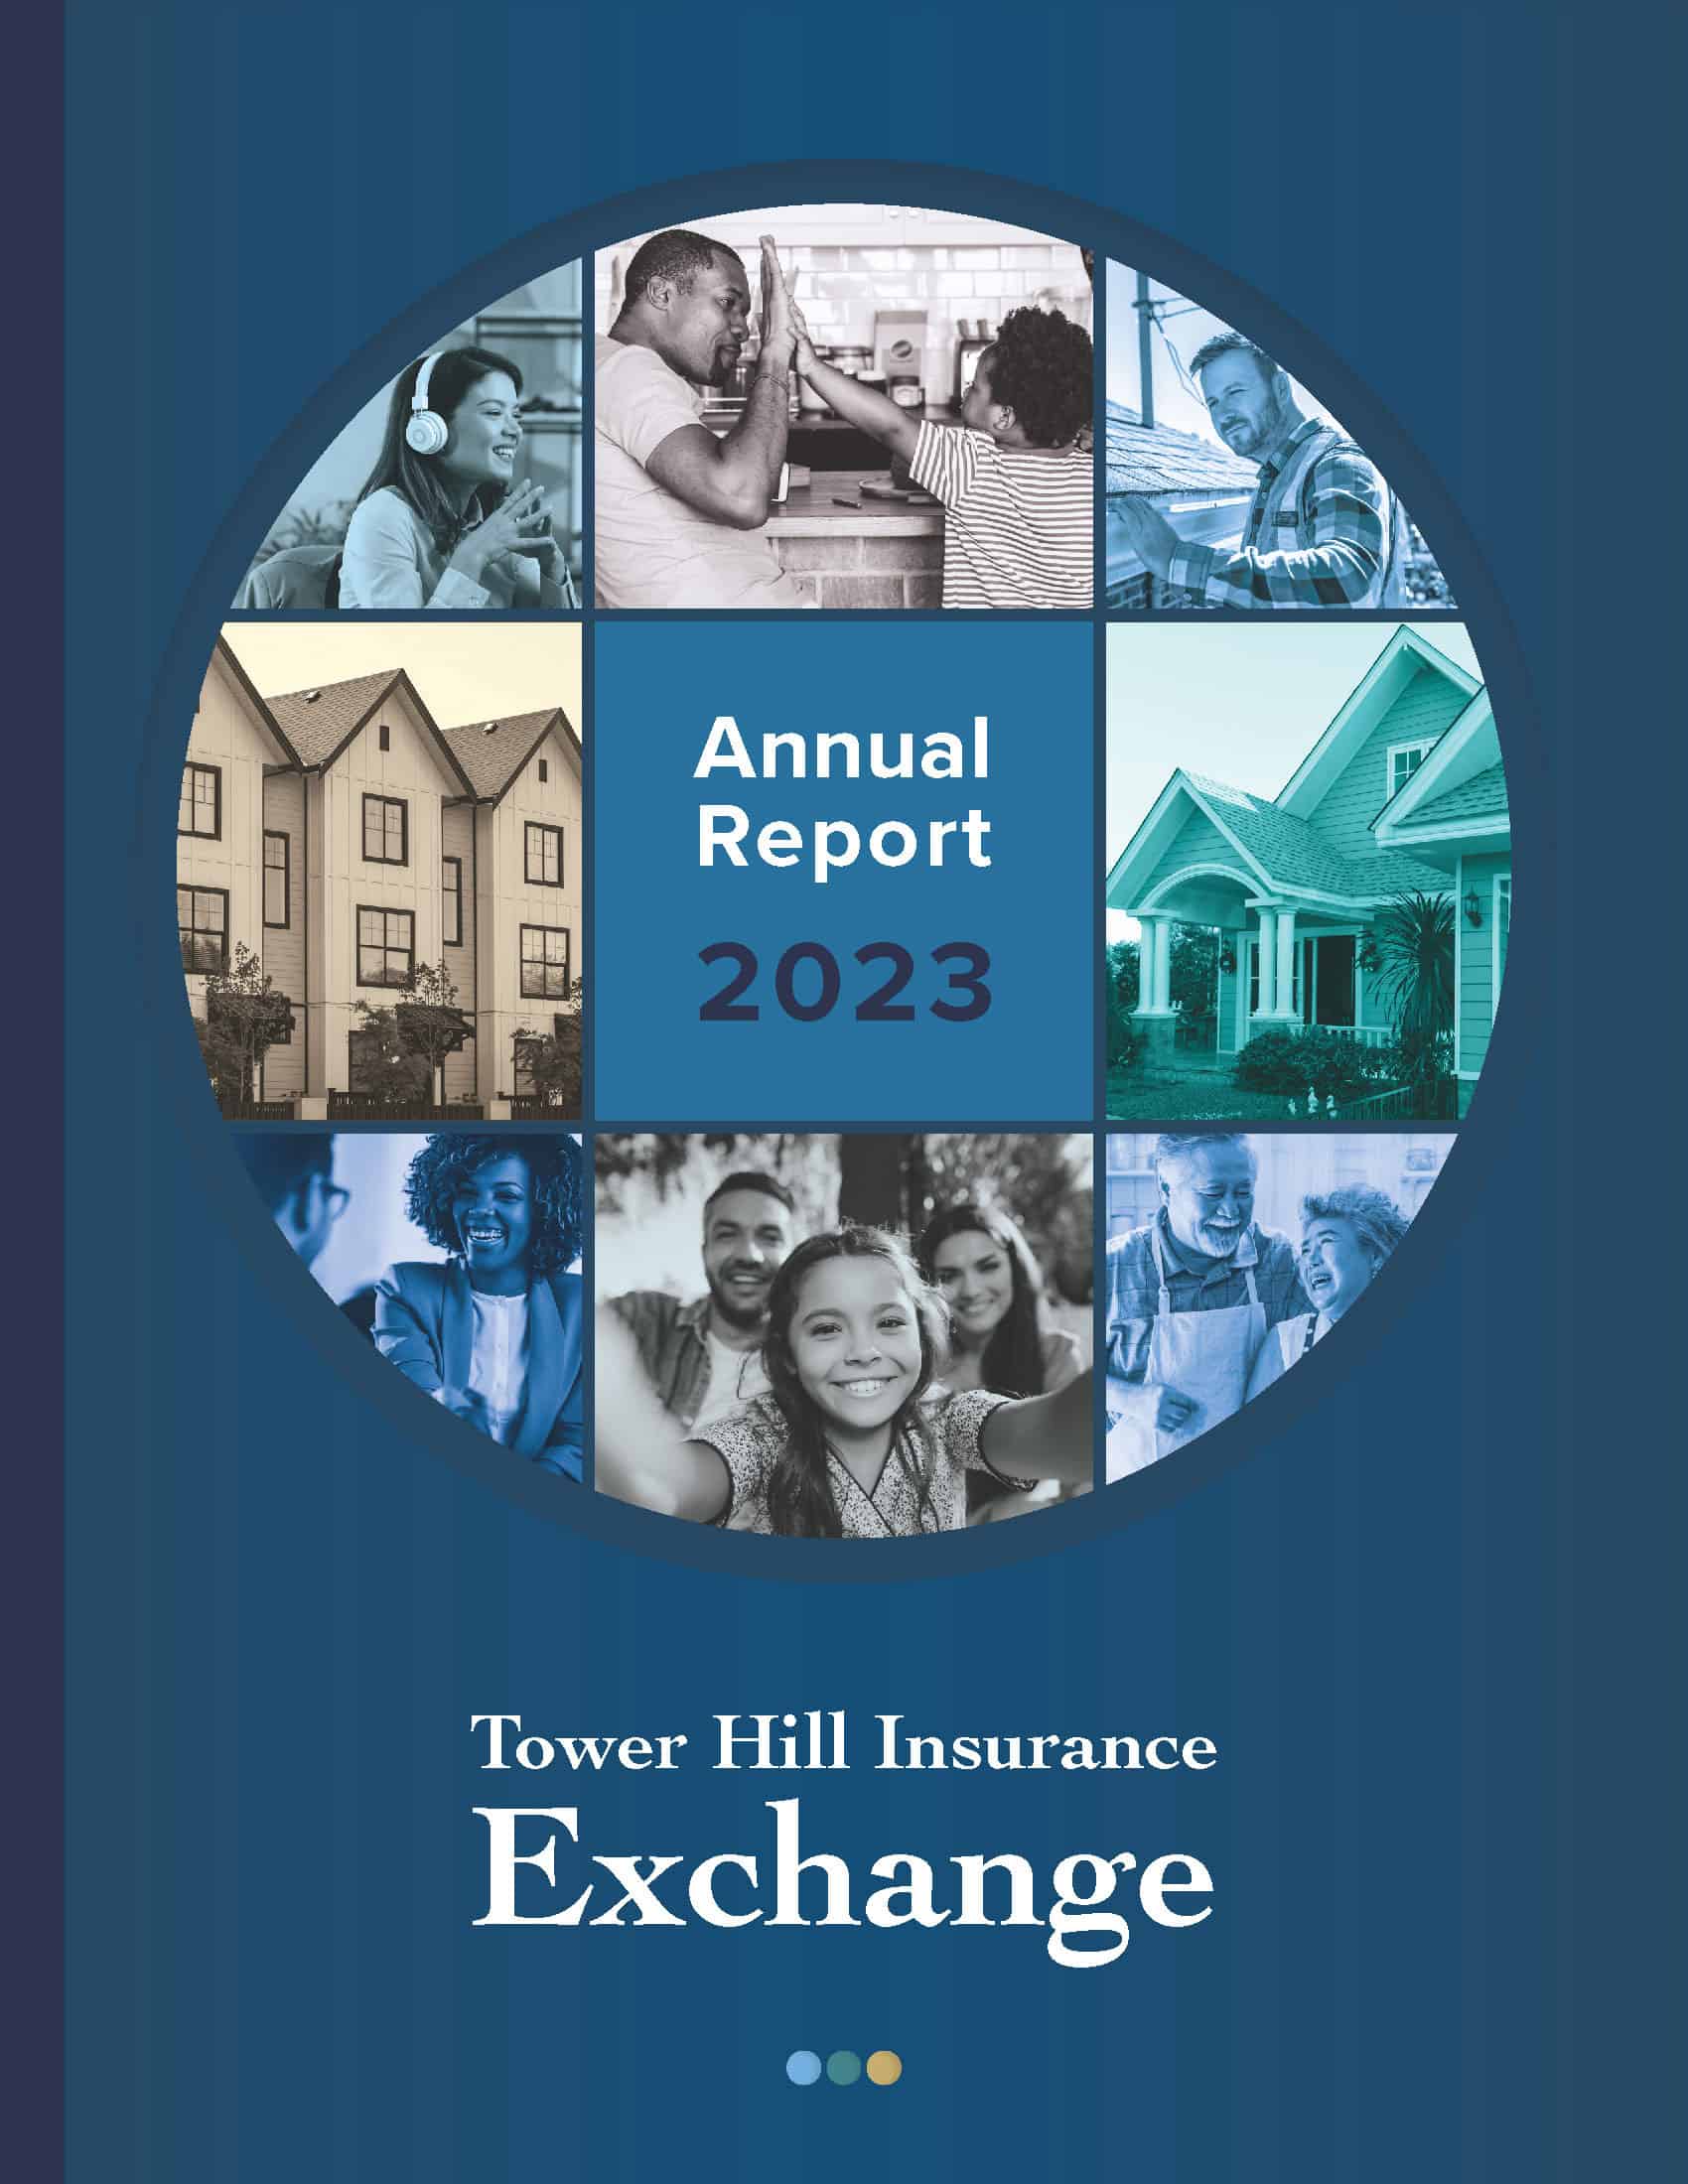 Annual Report 2023 | Tower Hill Insurance Exchange